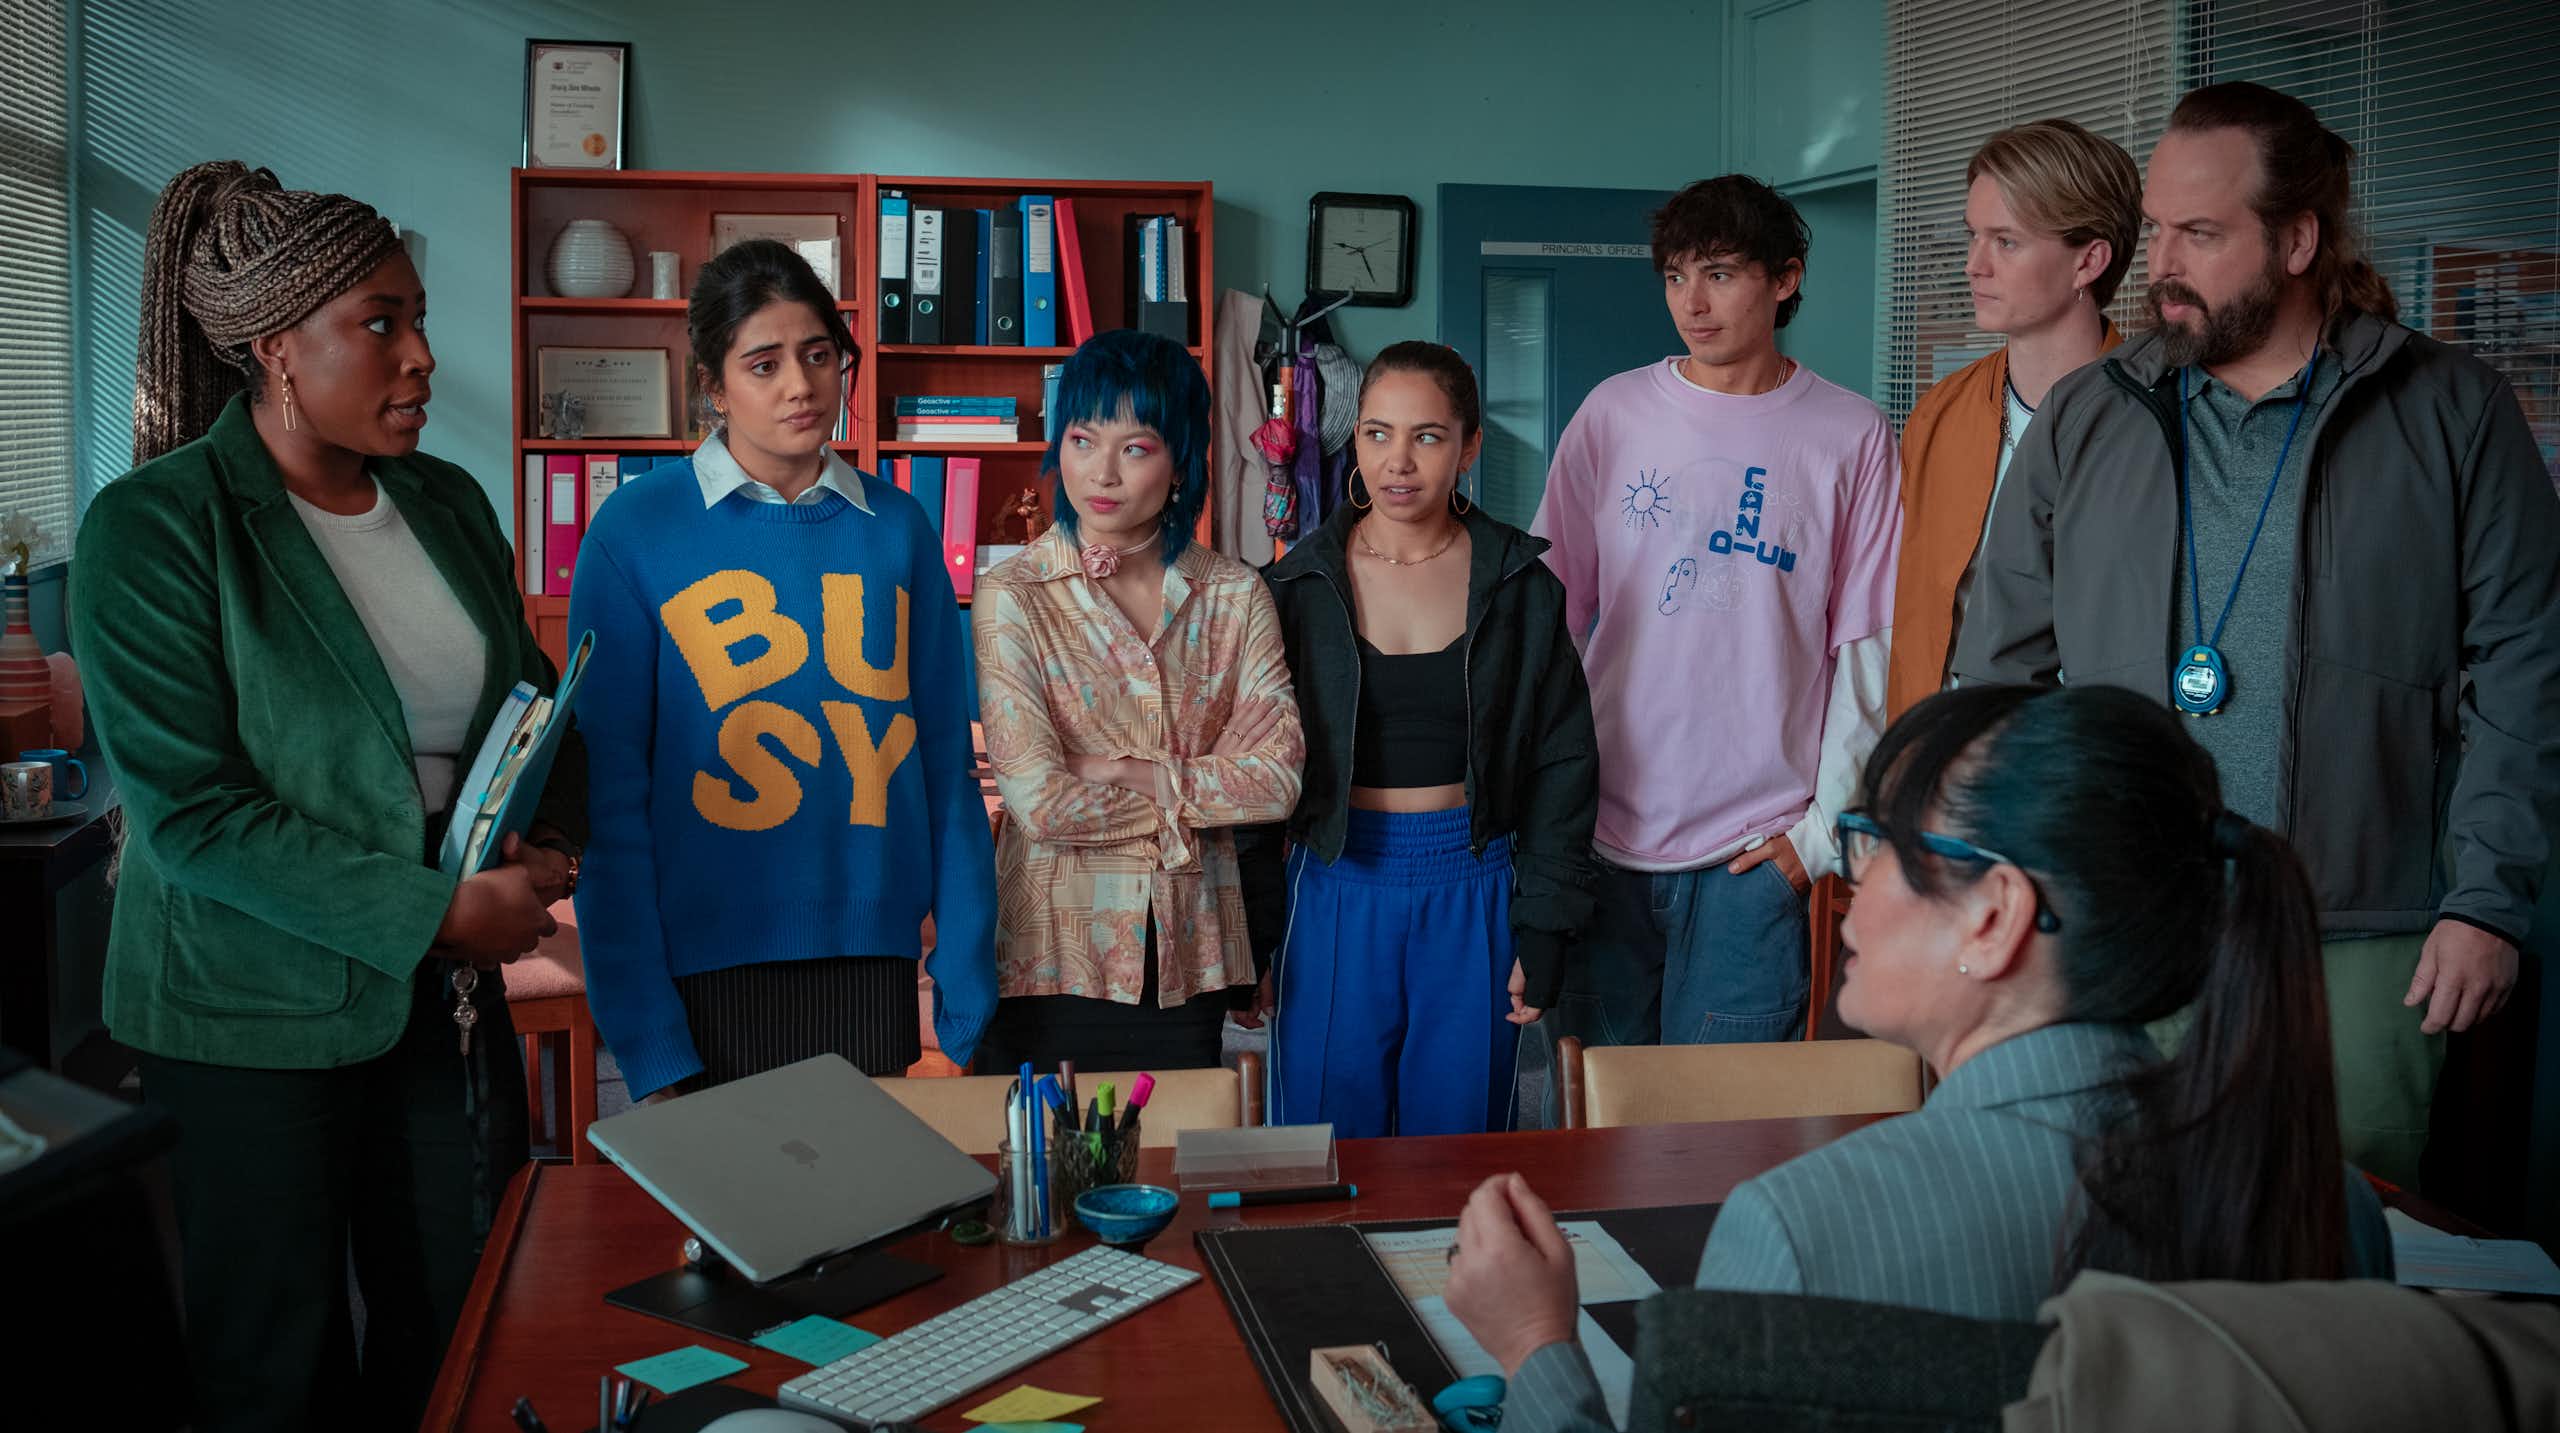 Production image. Students in the principal's office.